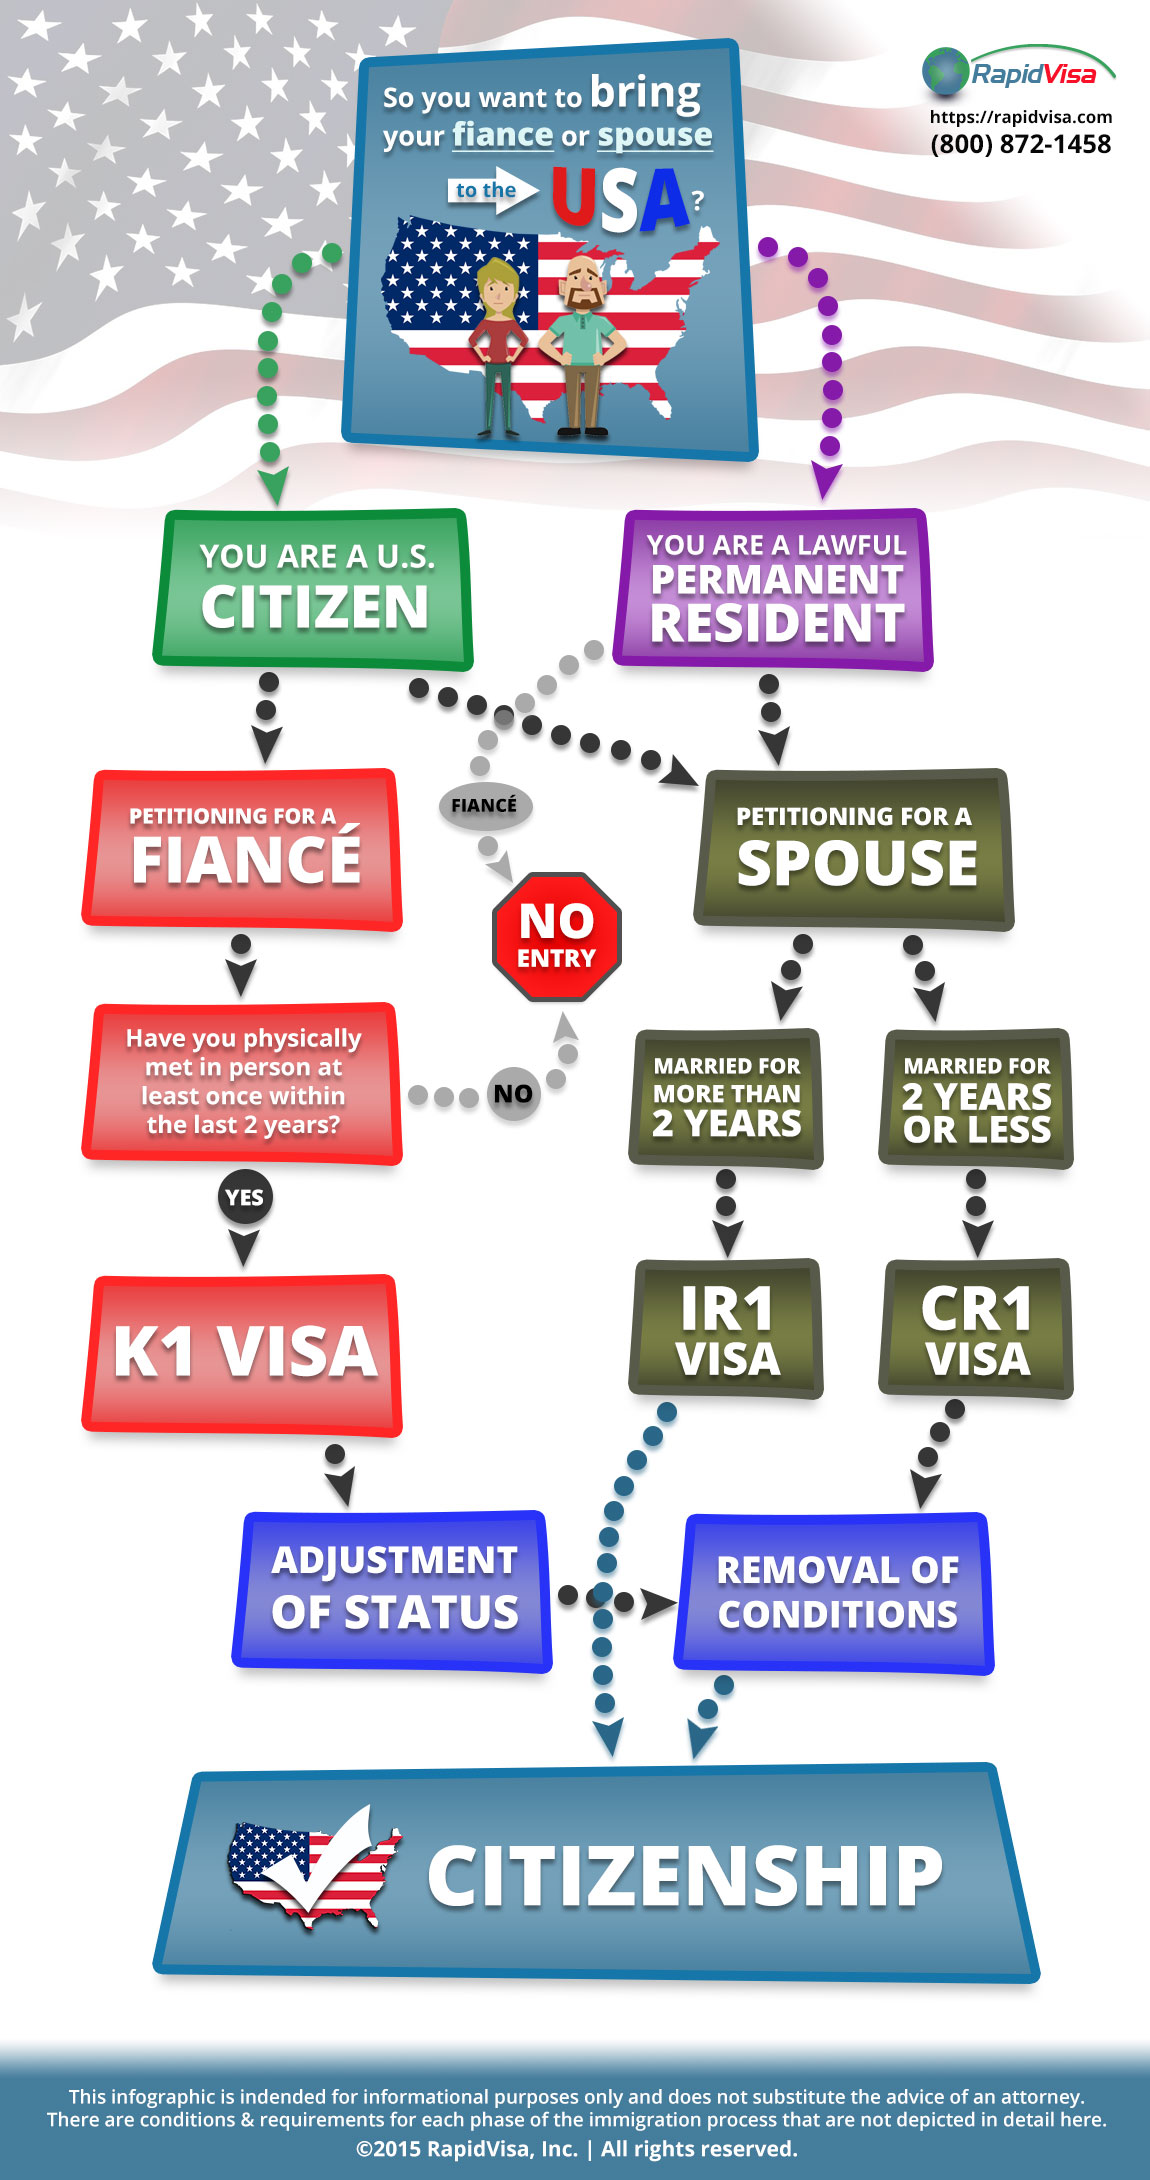 Bringing a Fiance or Spouse to the USA [Infographic]